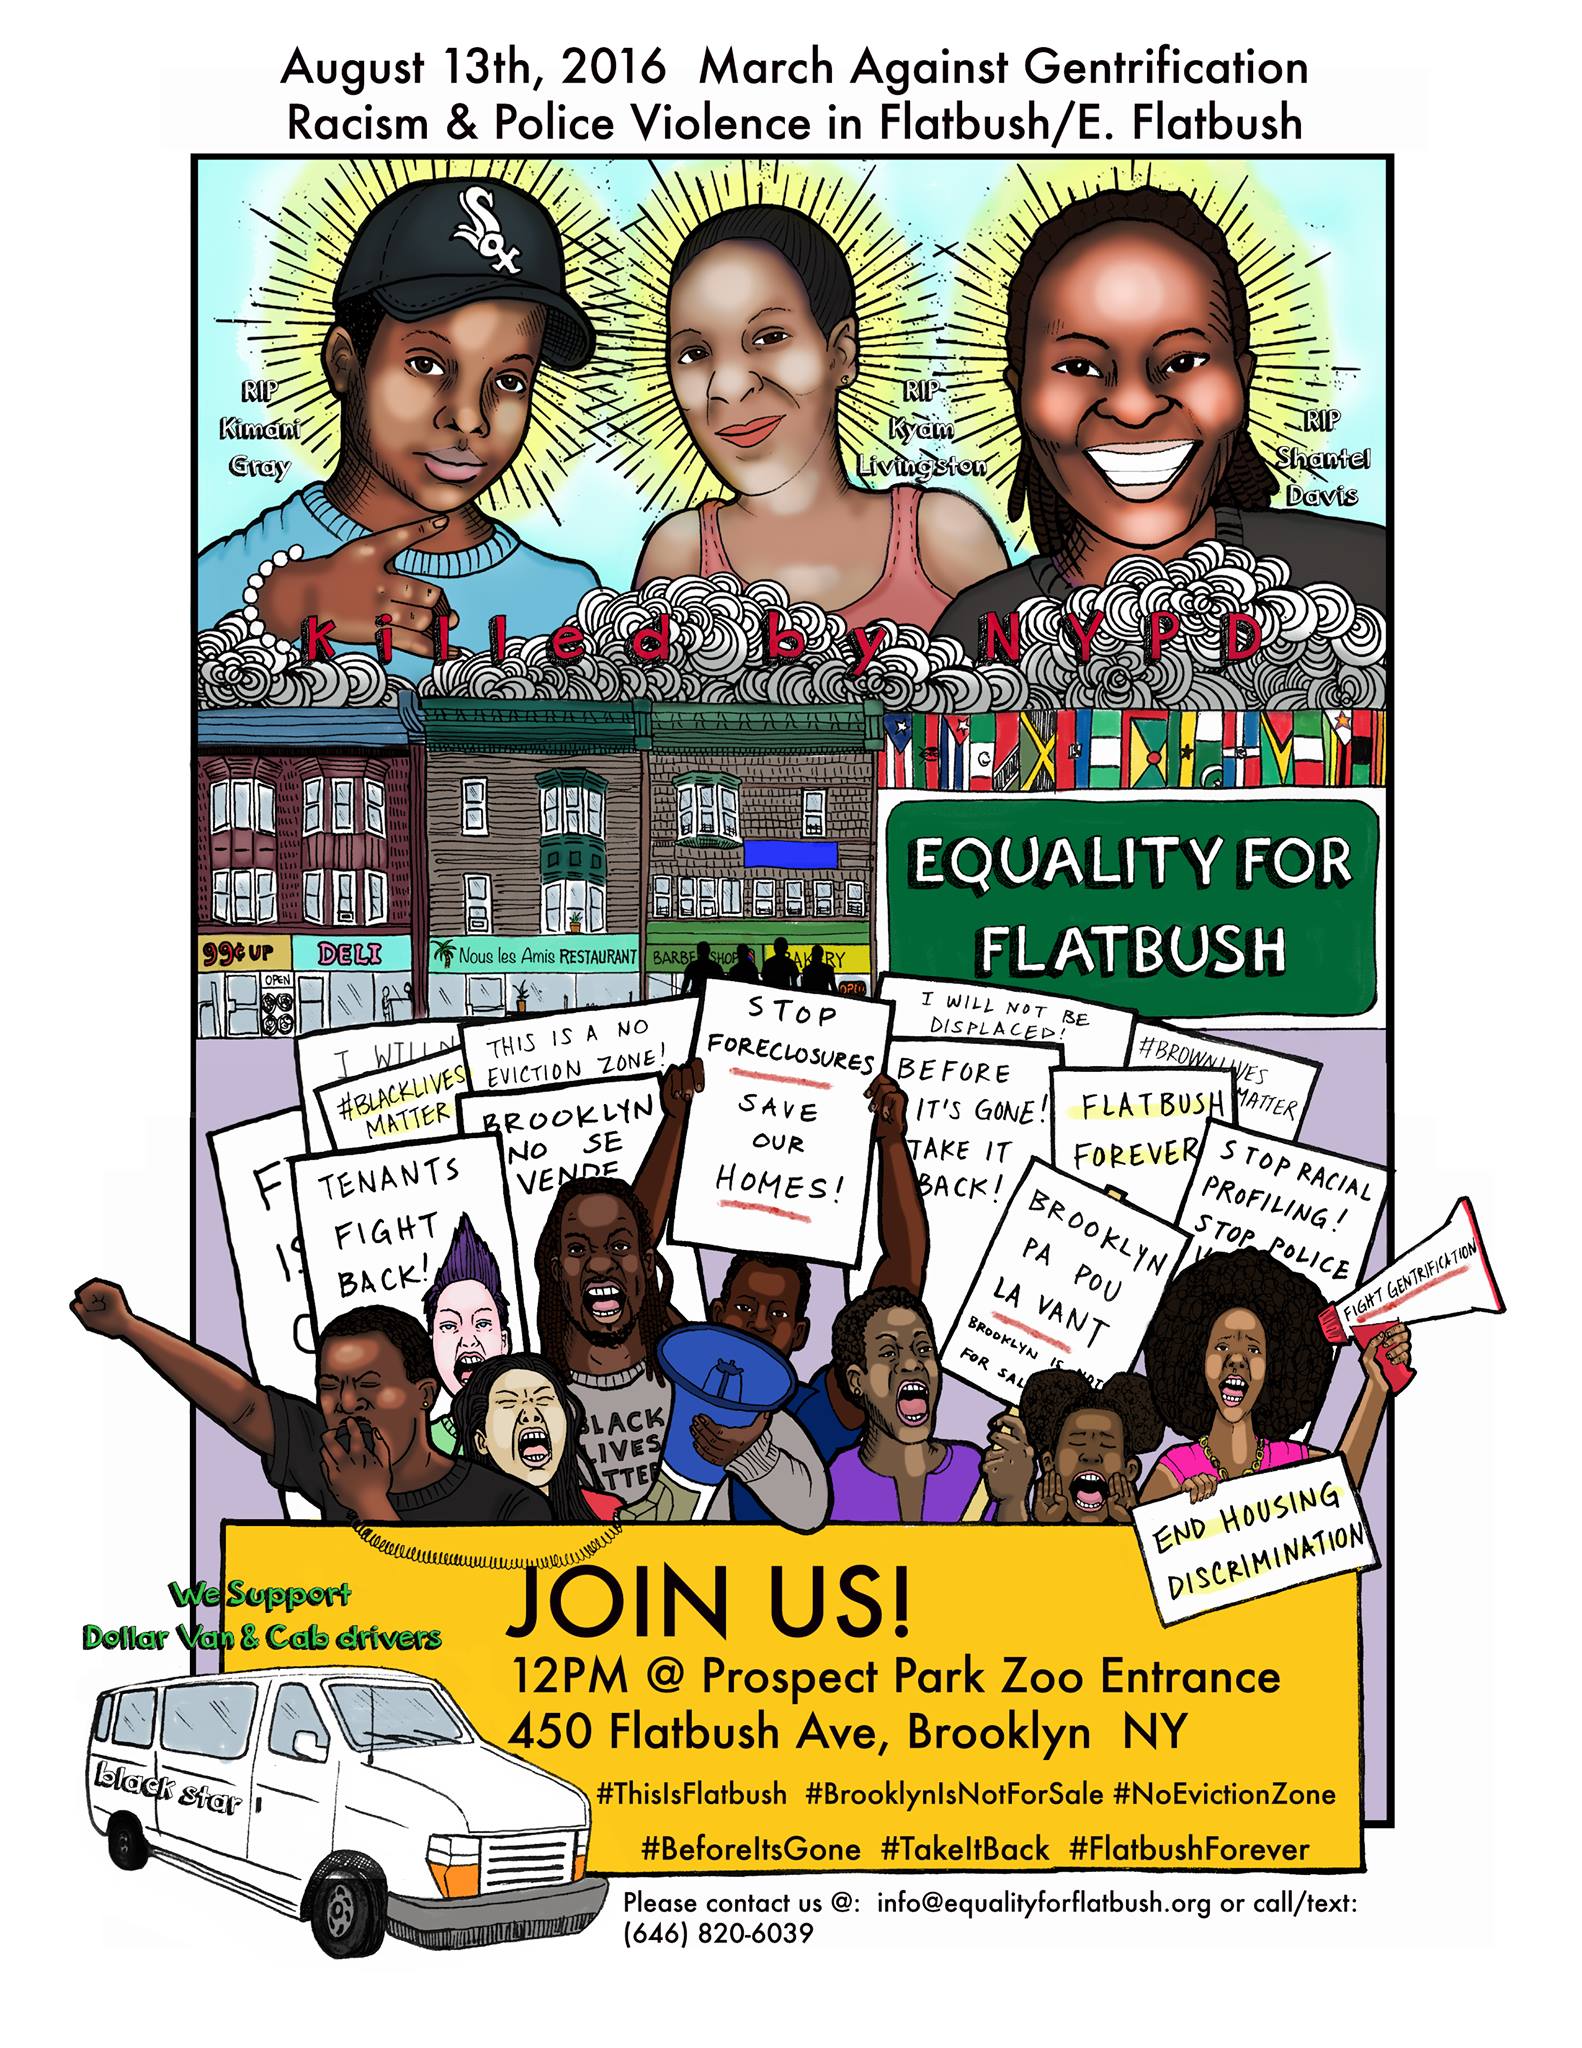 Equality for Flatbush march poster by Vanissa W. Chan